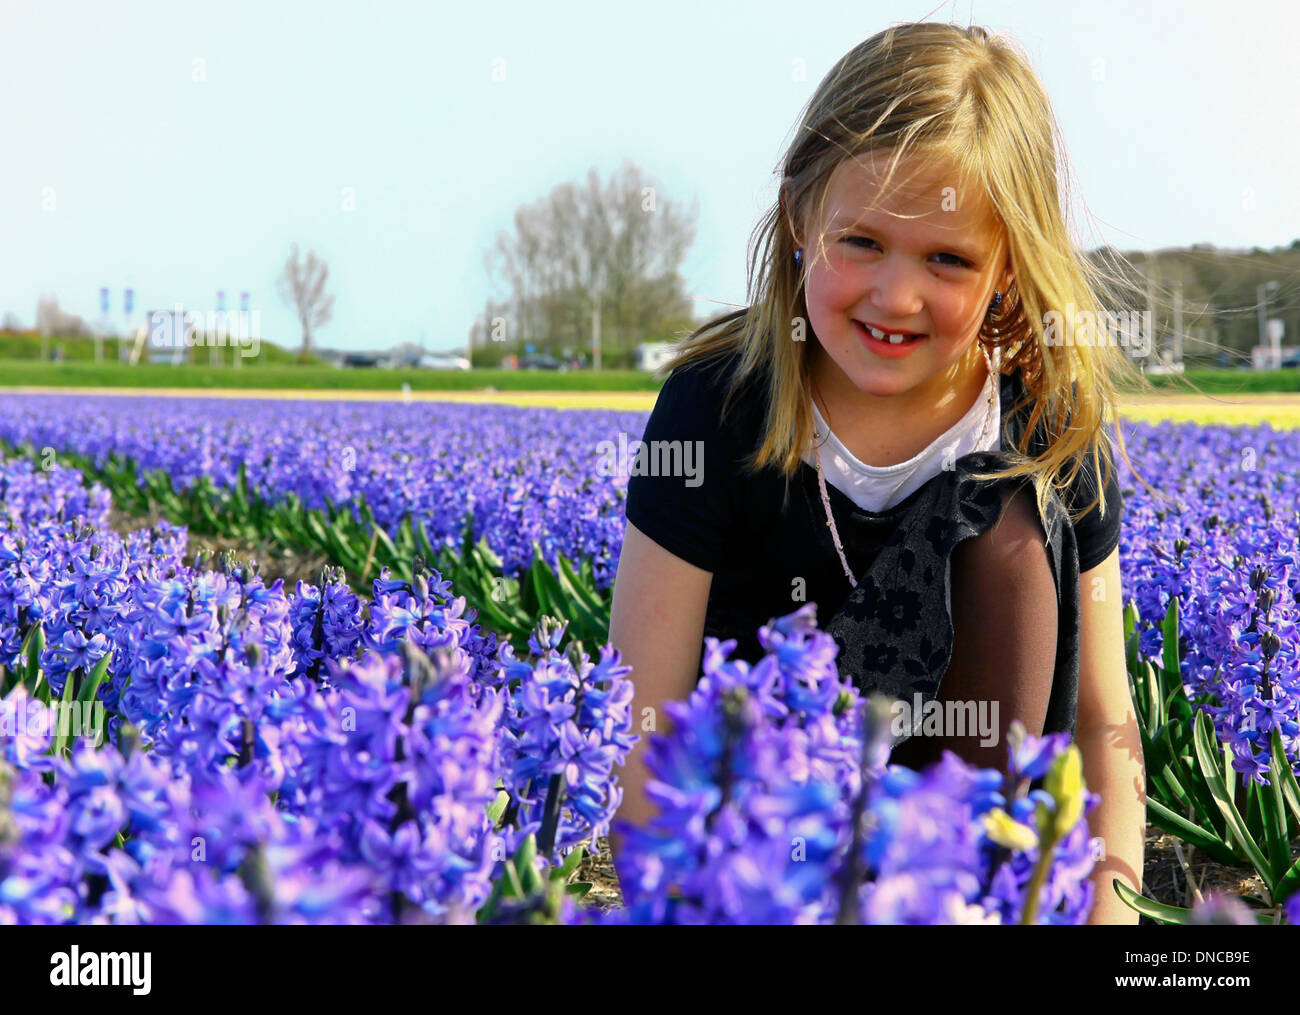 Little girl seated between blue hyacinths, Noordwijkerhout, South Holland, The Netherlands. Stock Photo